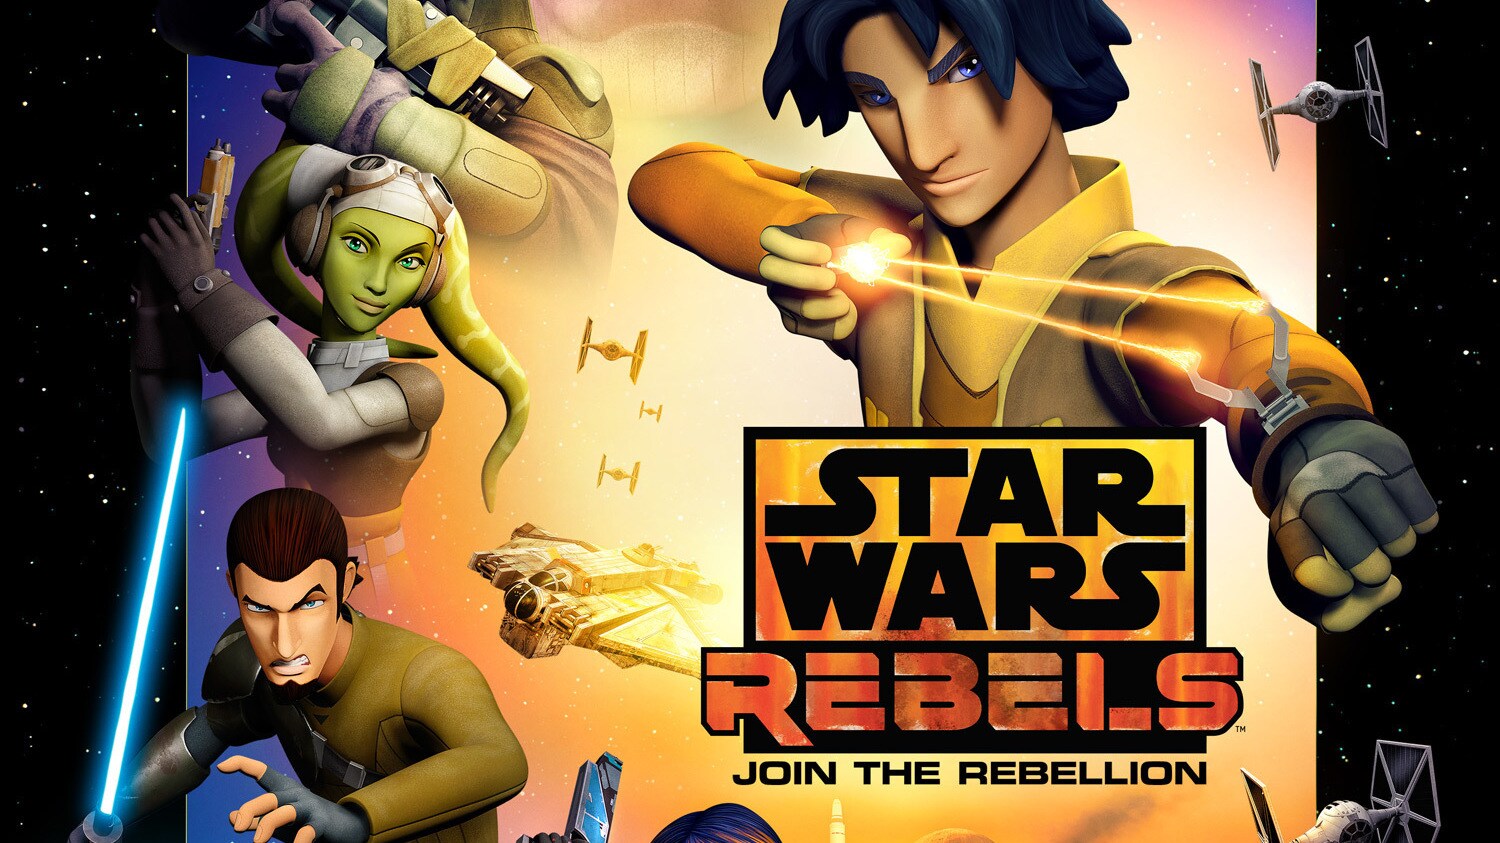 Star Wars Rebels and More at San Diego Comic-Con 2014 - UPDATED!